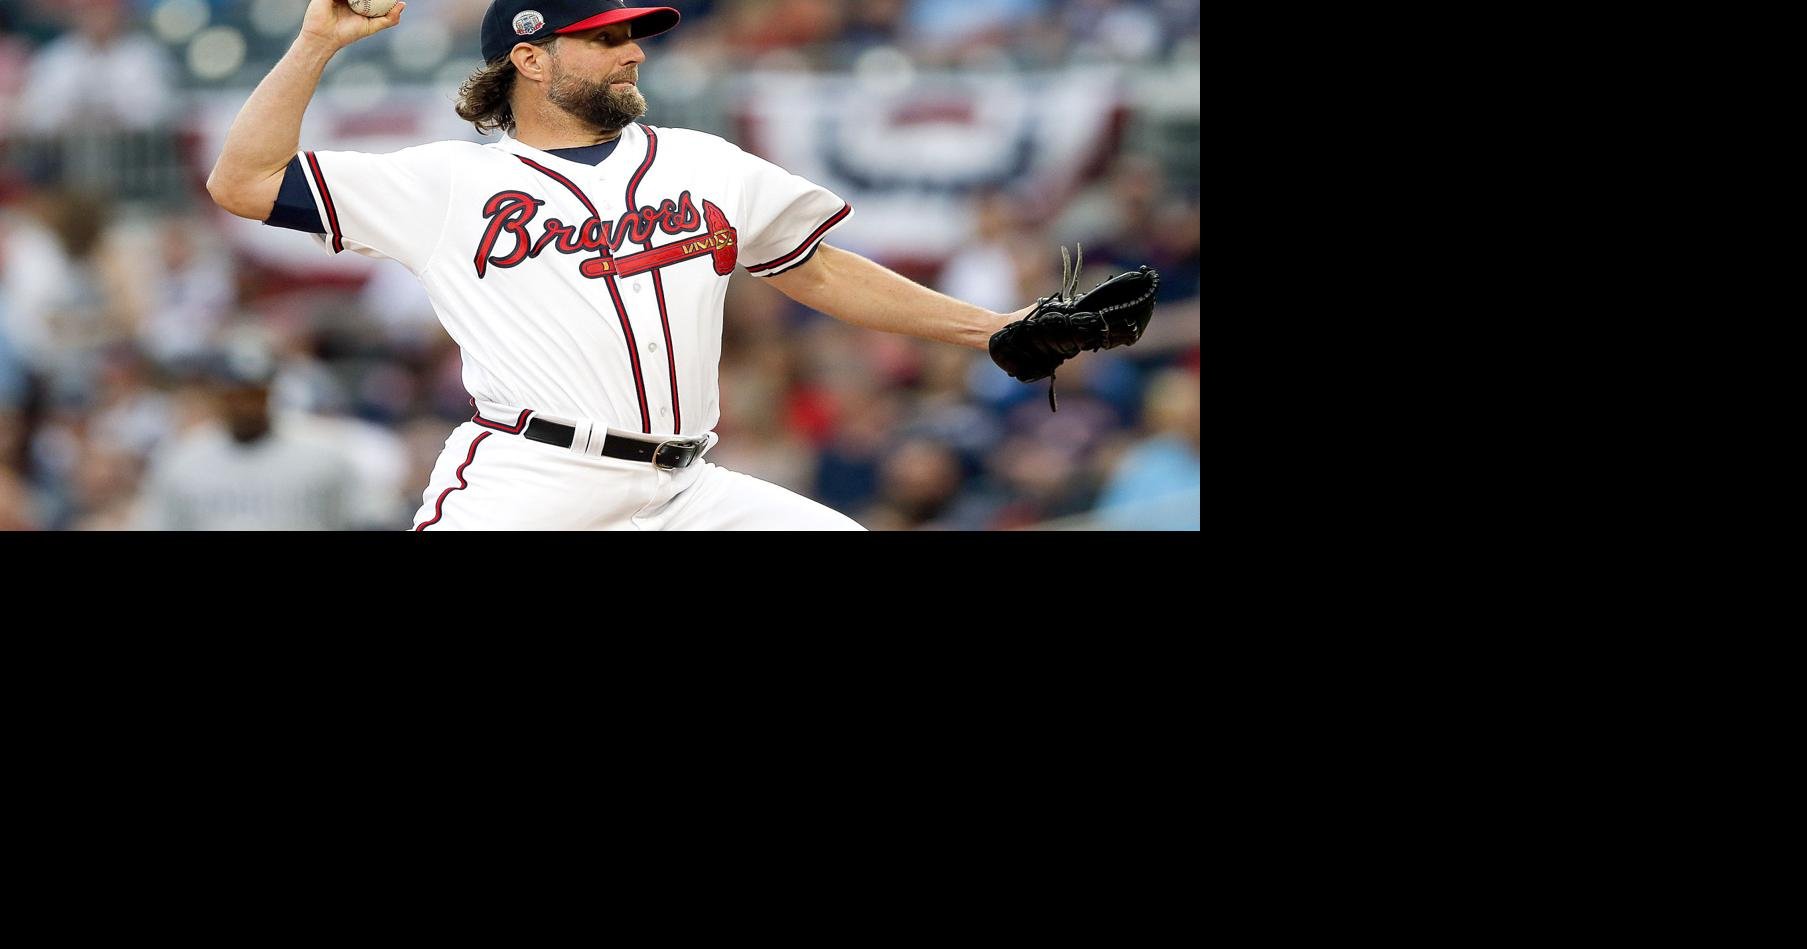 New York Mets Knuckleballer R.A. Dickey Talks About His Pitch